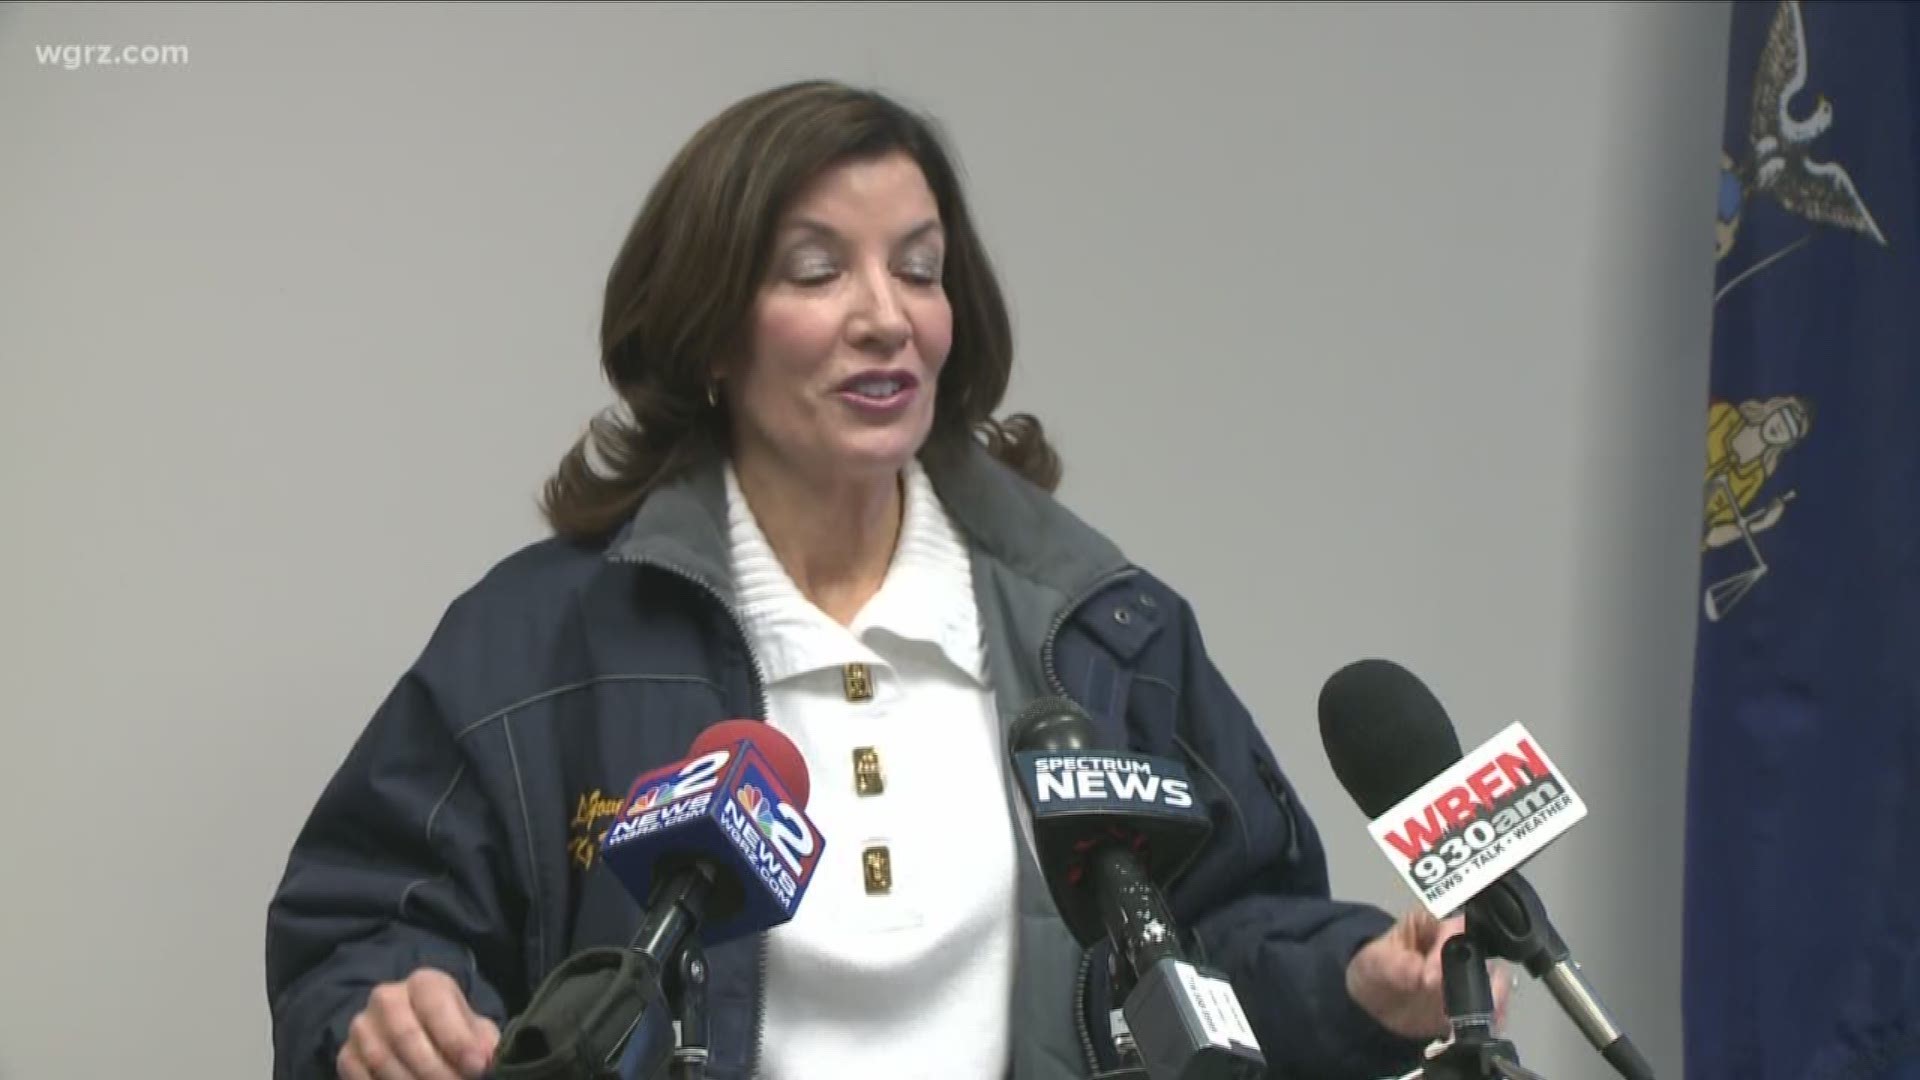 Lt Governor Hochul addresses her pay raise